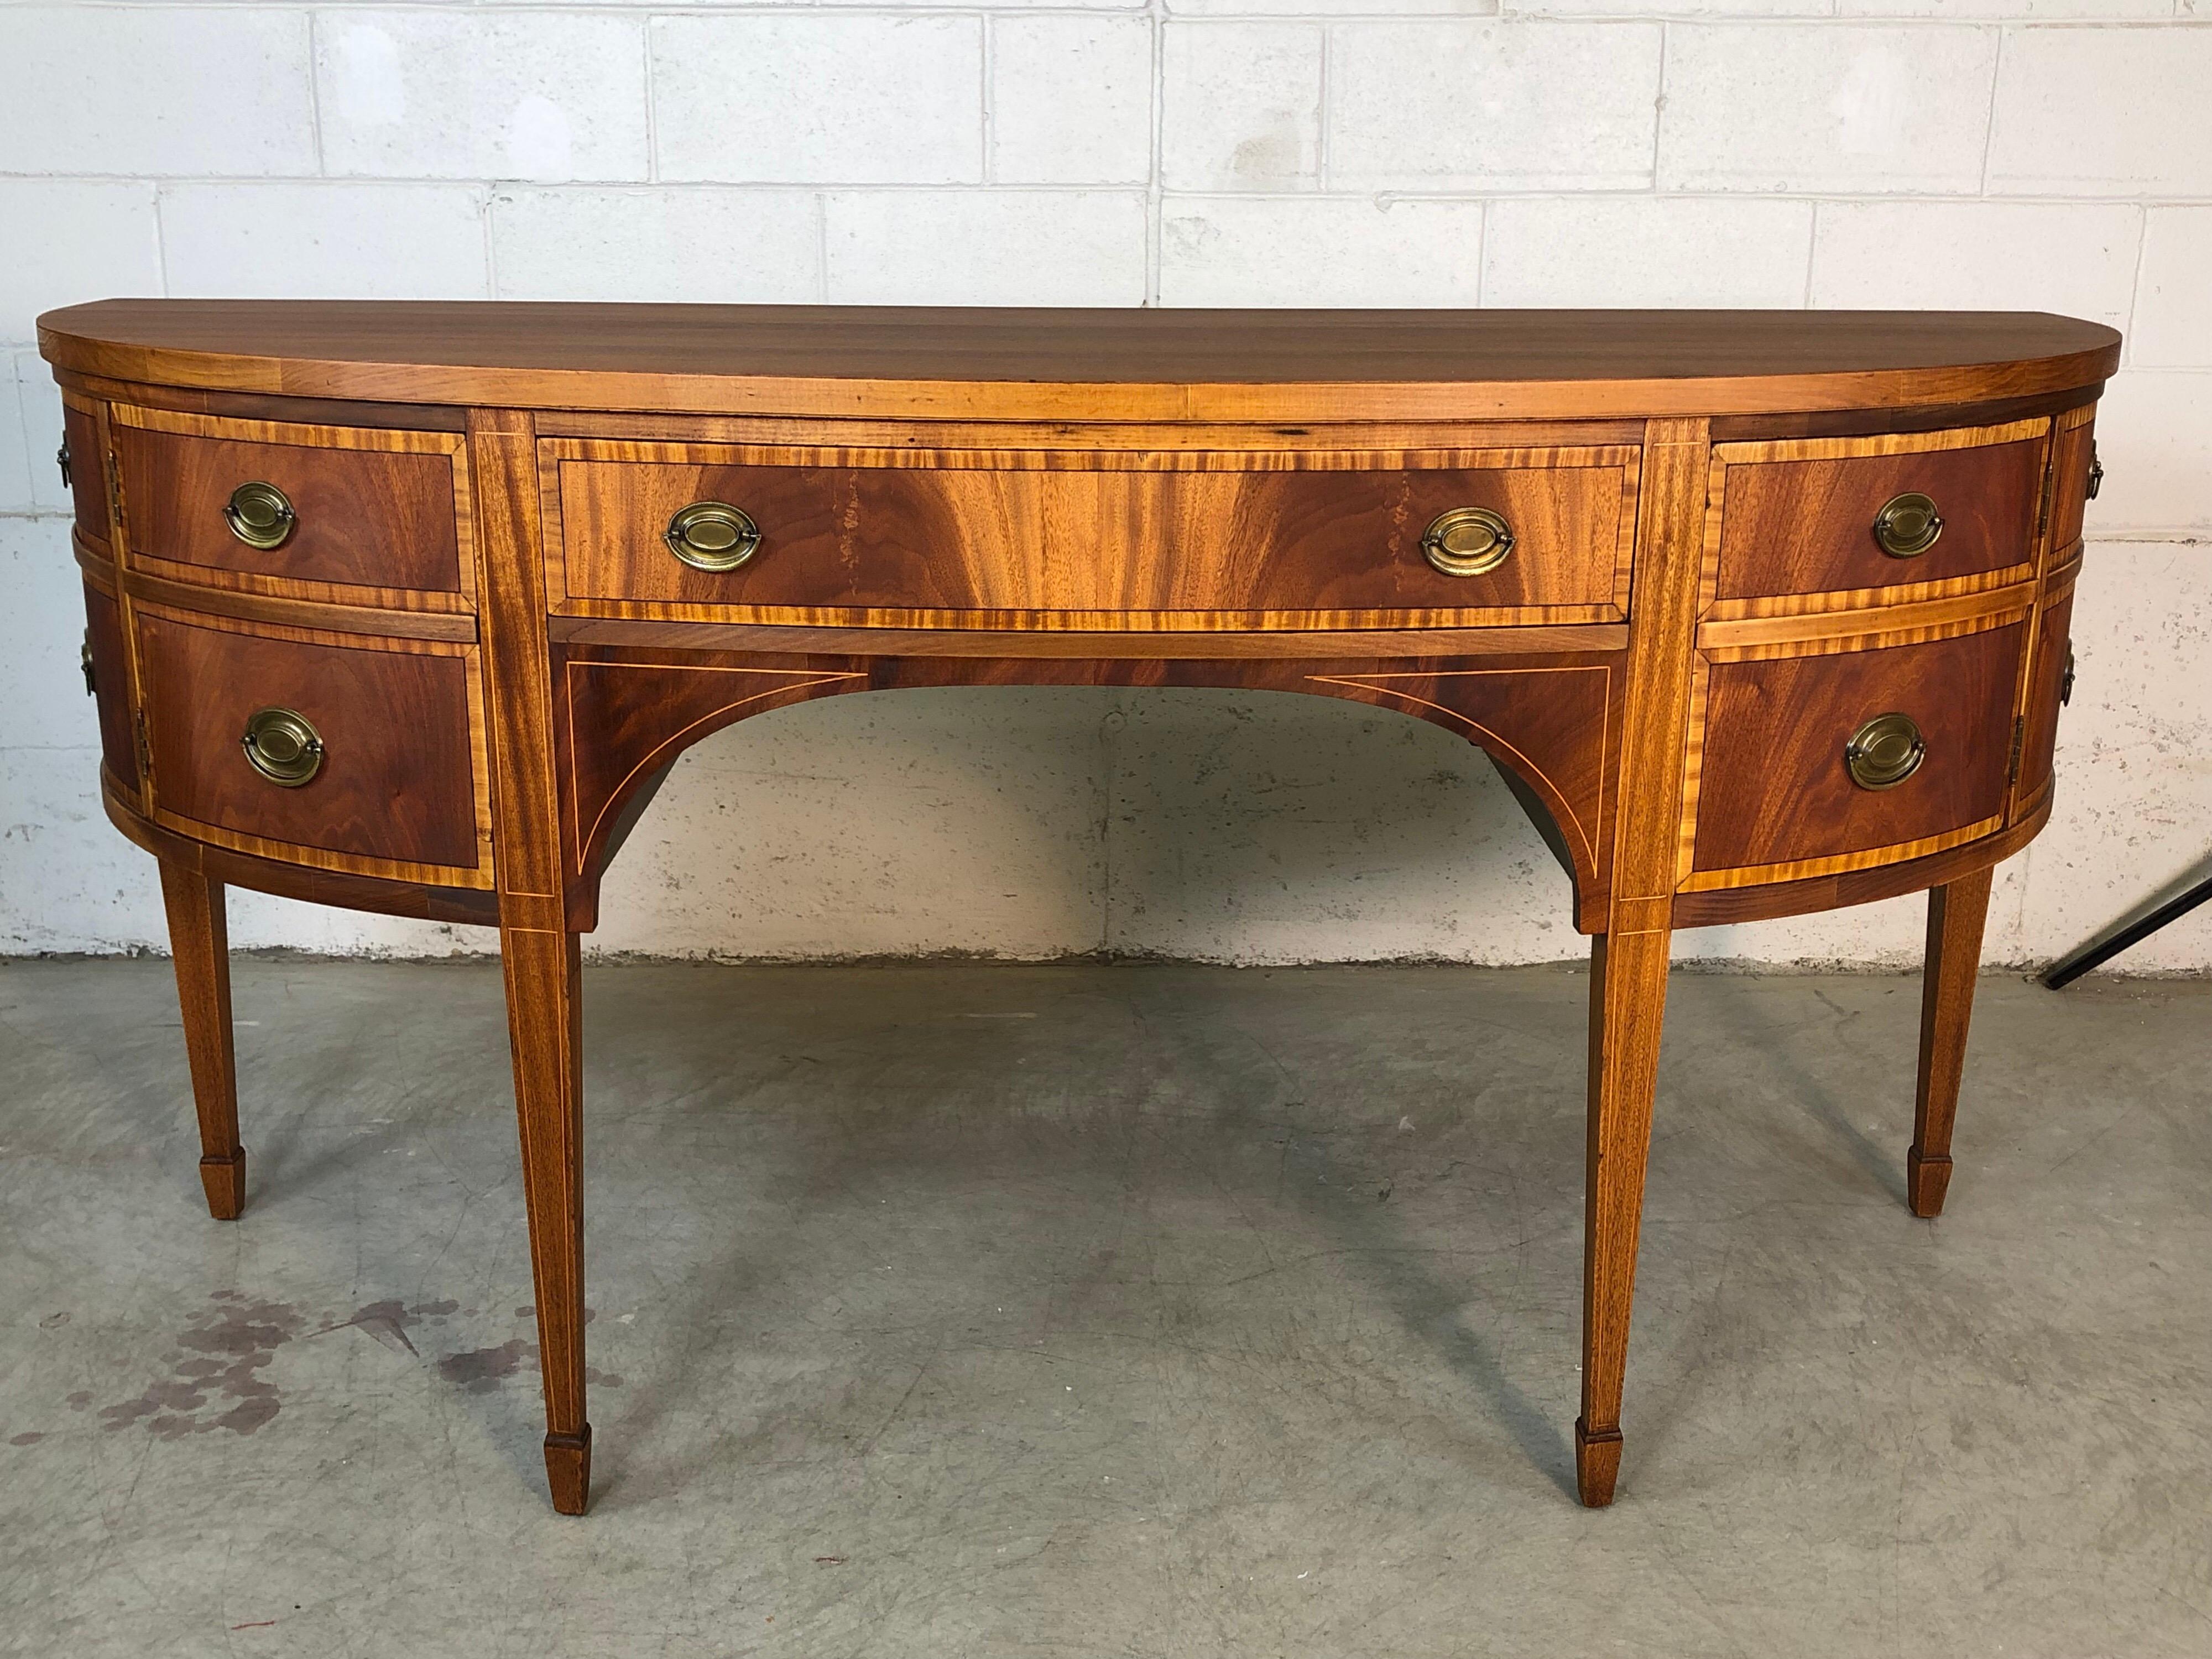 Antique Federal style inlaid mahogany demilune sideboard. The sideboard has matchbook style mahogany fronts with brass pulls. There is one center drawer for storage and another draw hidden behind a side door. The side drawers are faux and there is